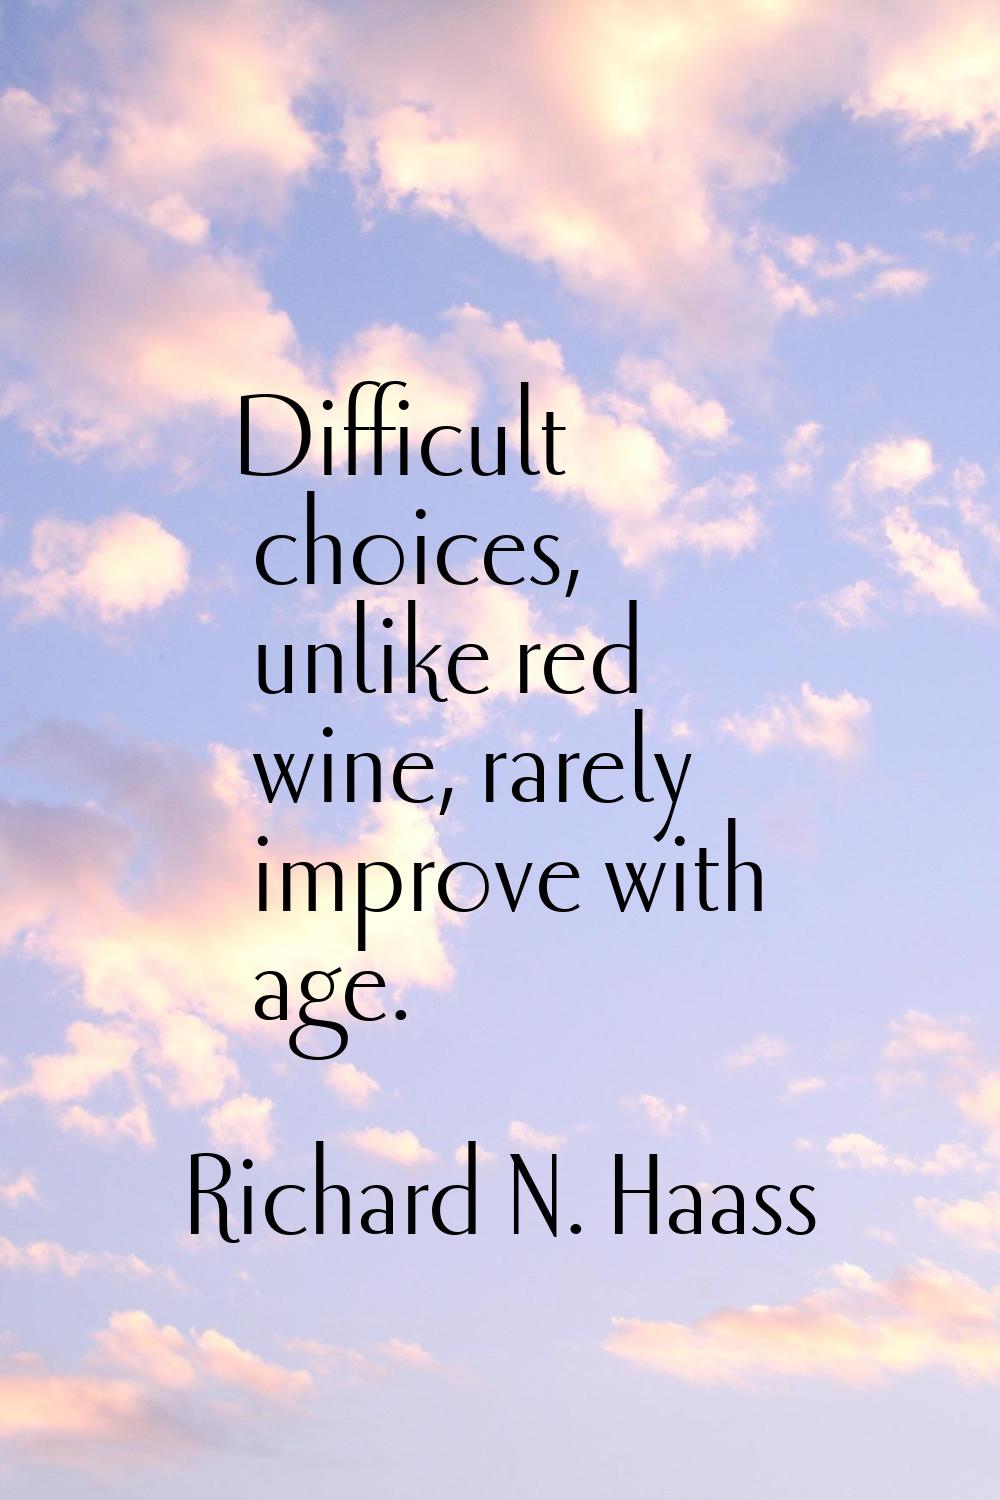 Difficult choices, unlike red wine, rarely improve with age.